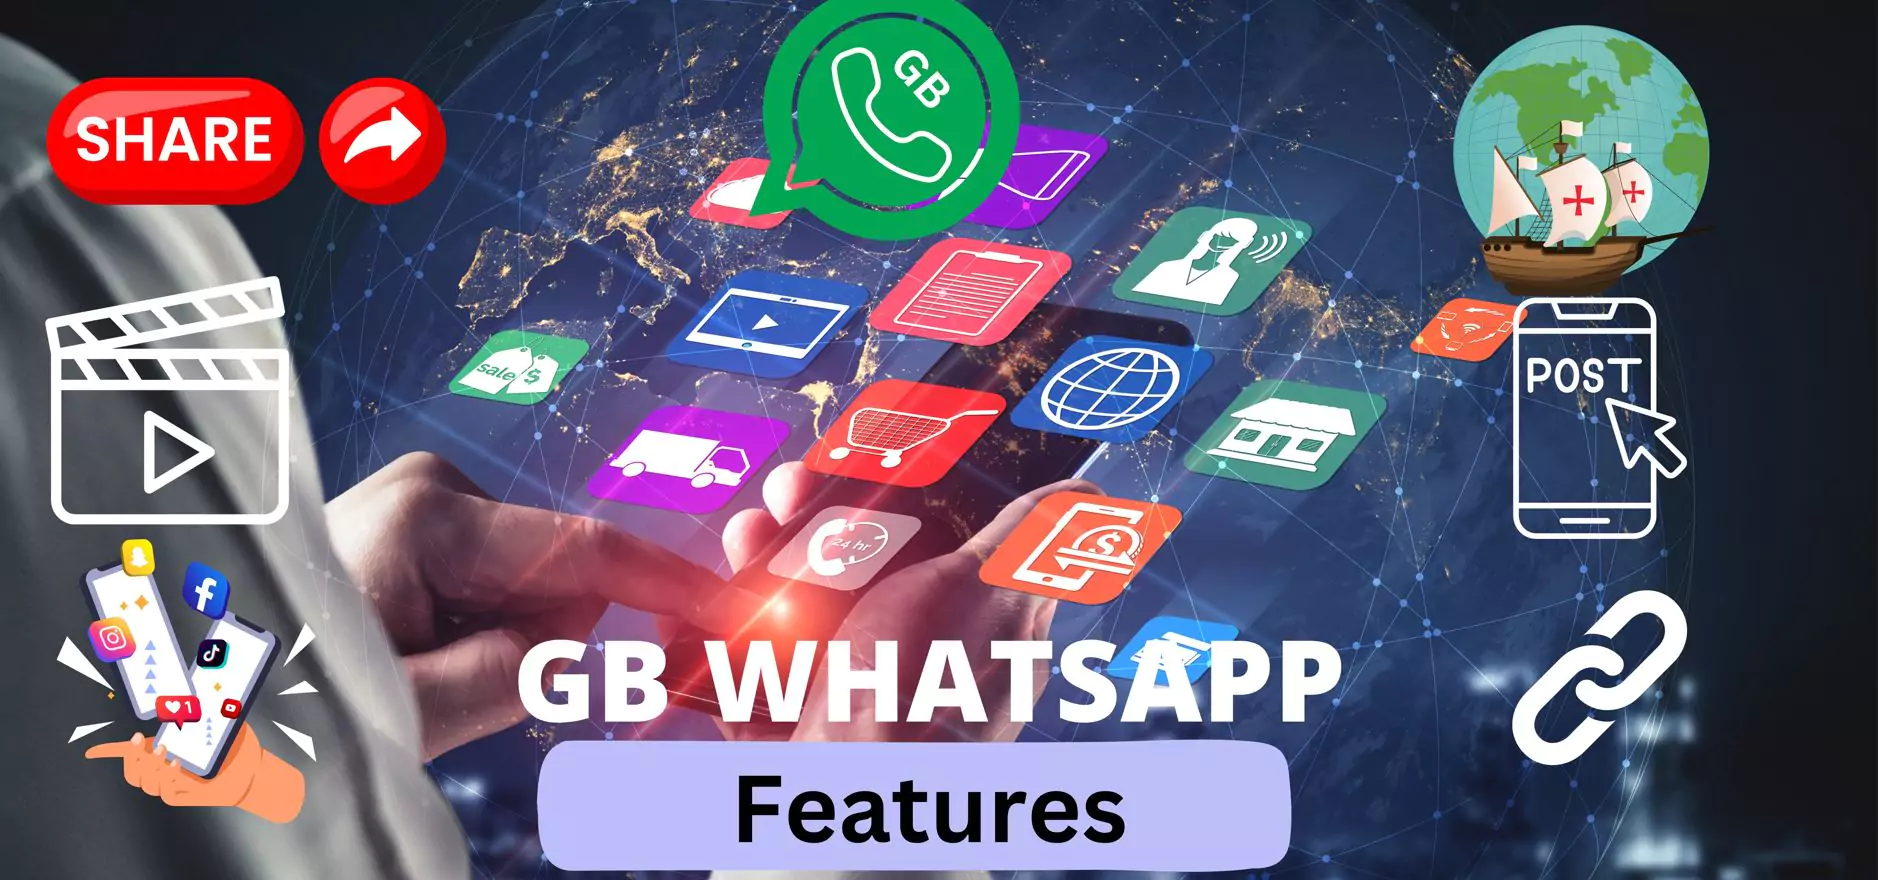 GBWhatsApp Features 1